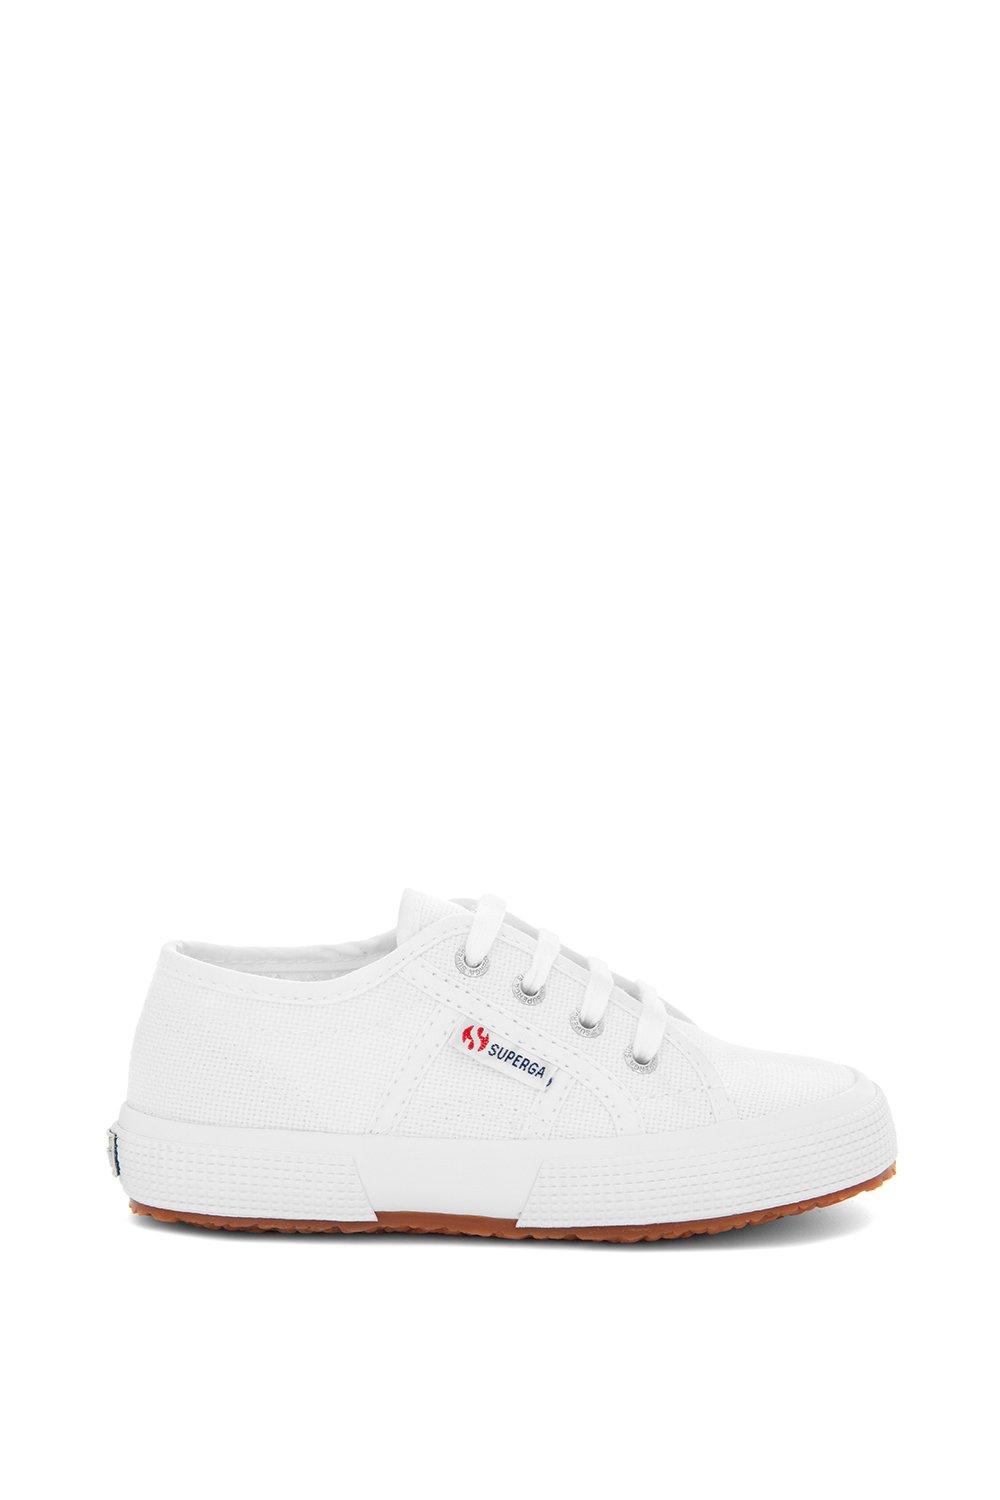 ’2750 Junior Cotu Classic’ Lace-up Canvas Trainers